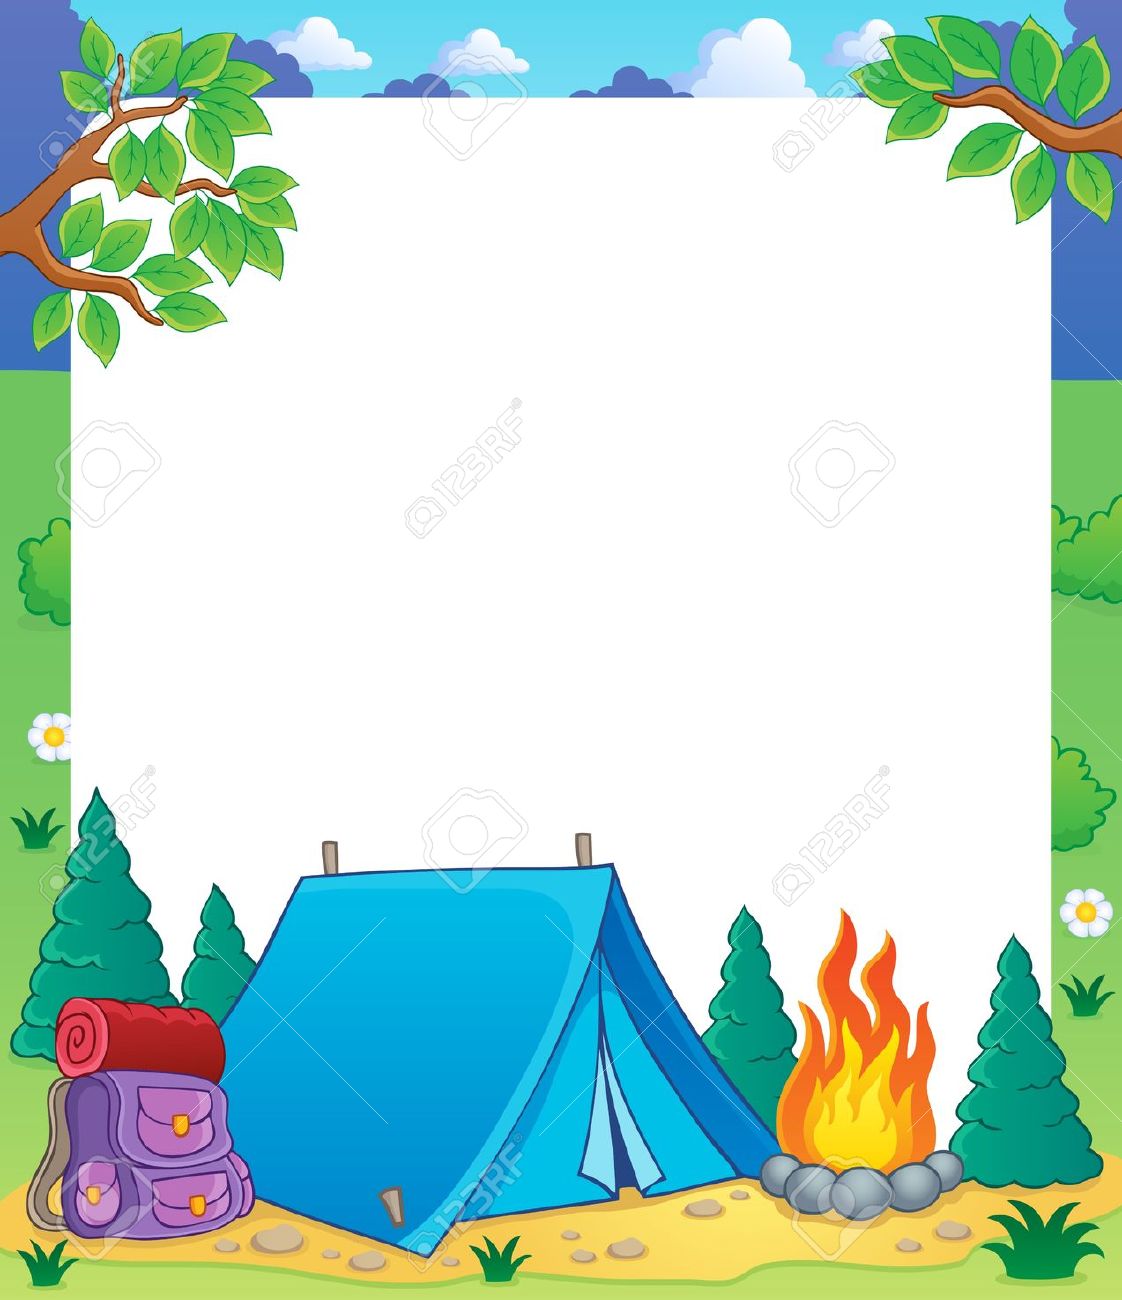 Camping clipart background.